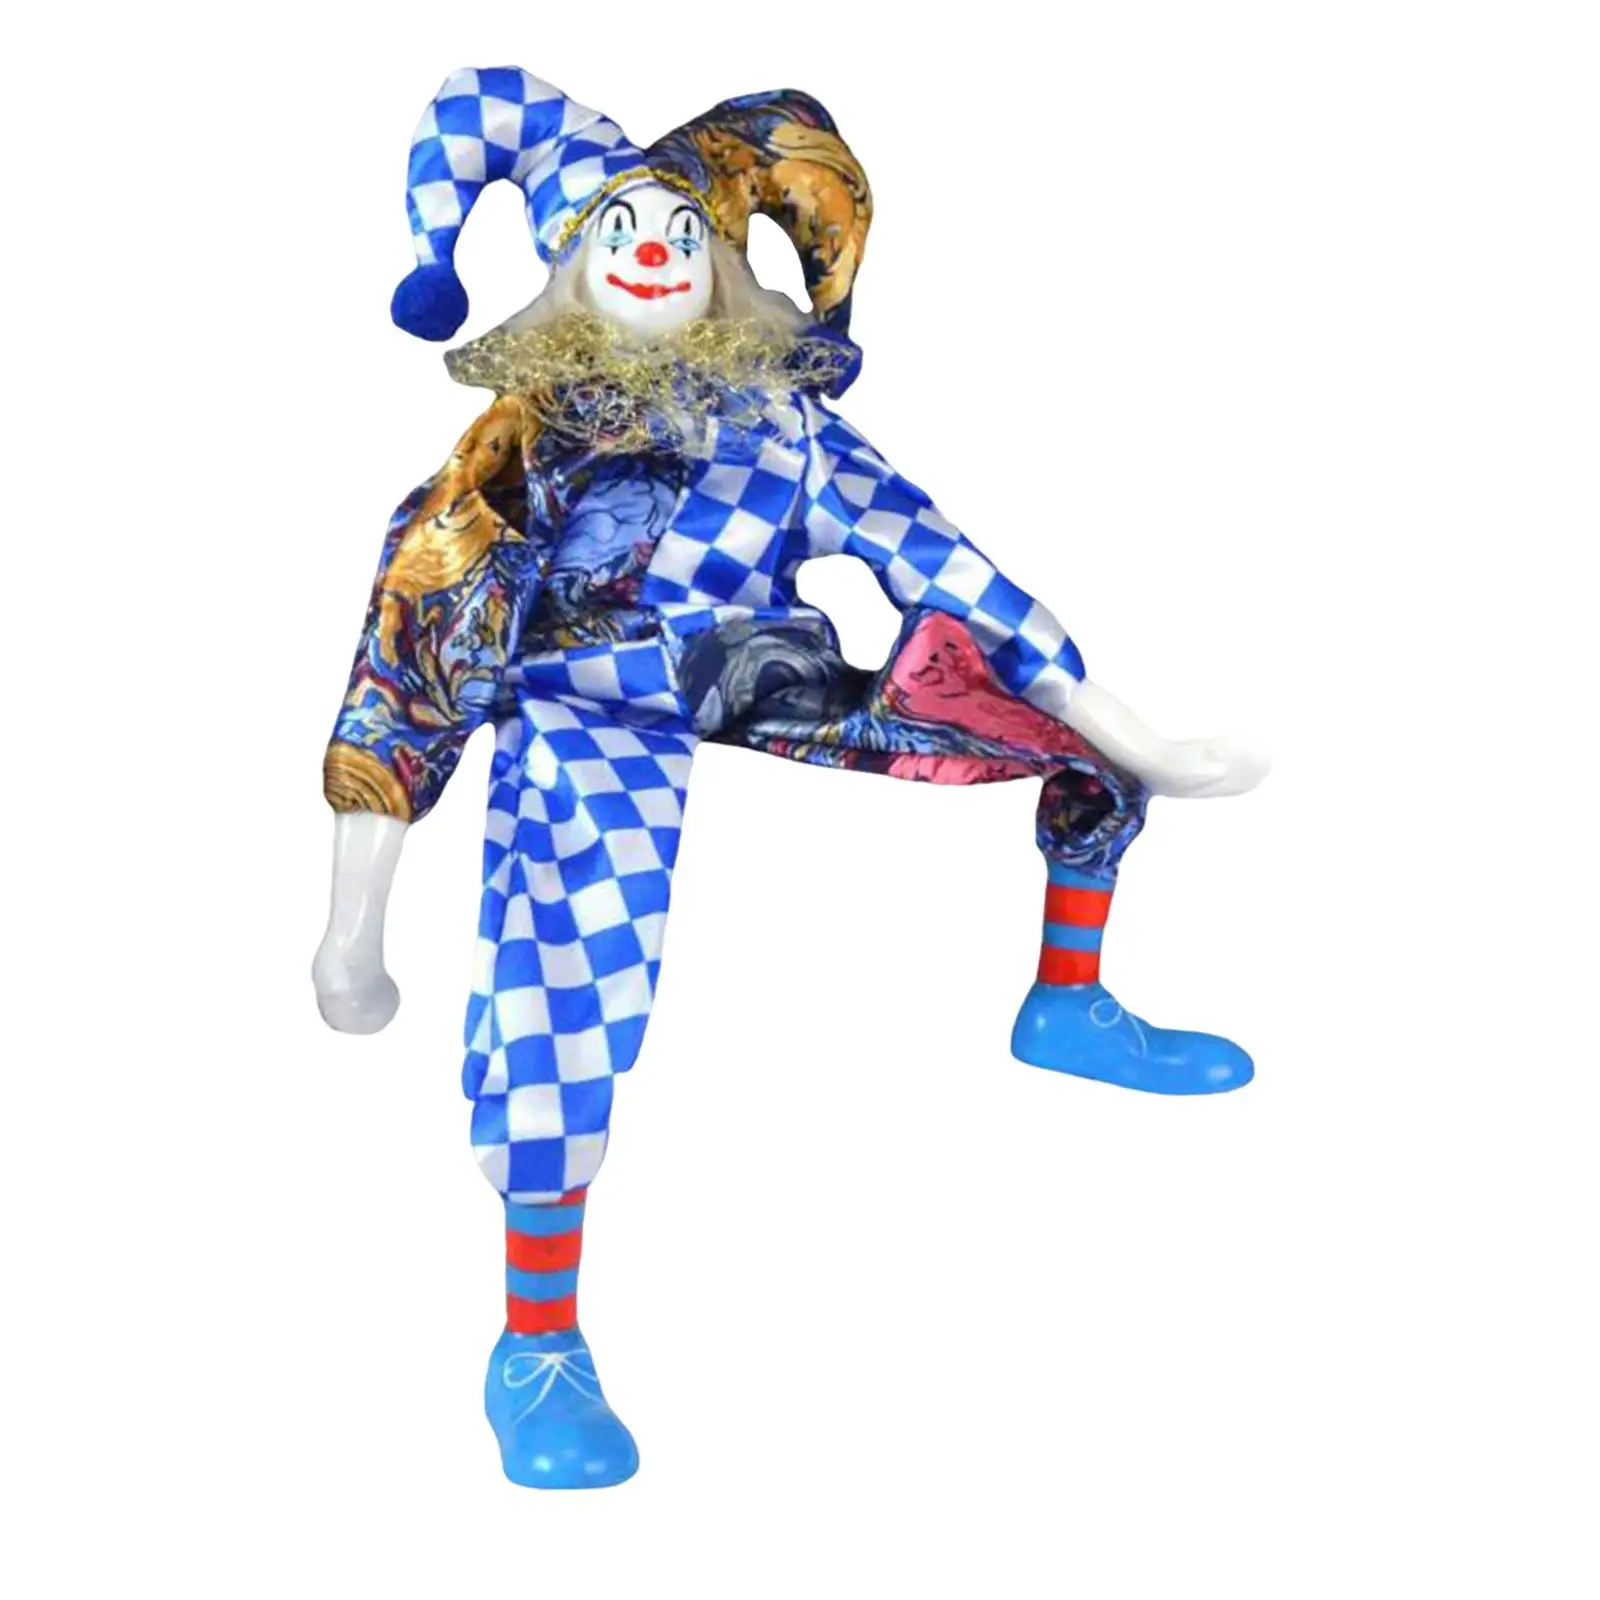 Clown Doll Figure Funny Harlequin Doll Porcelain Doll for Office Ornaments